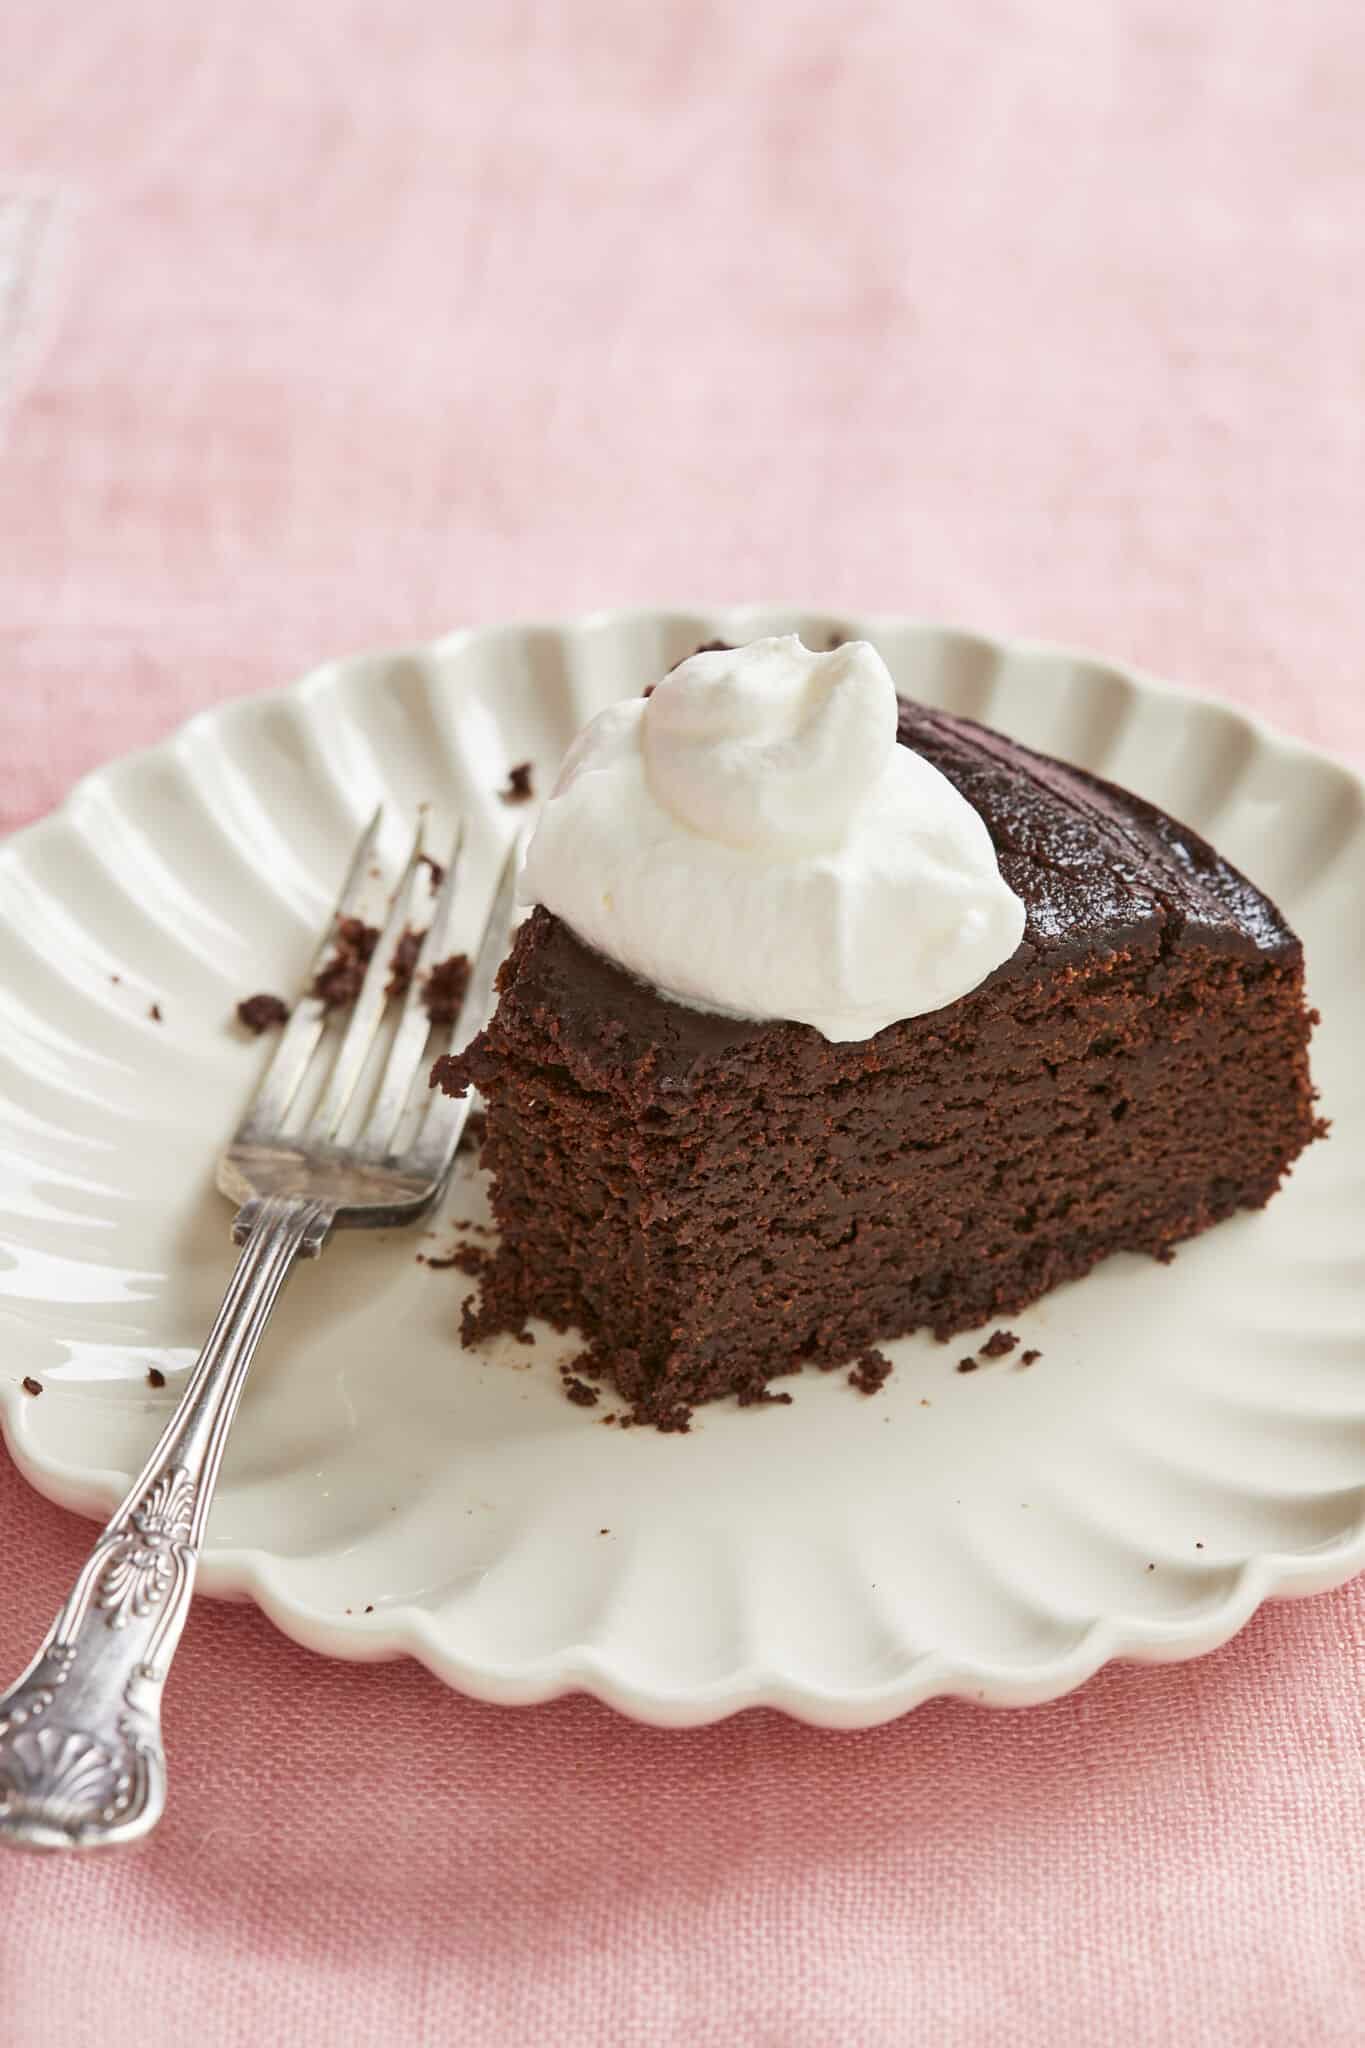 A close-up shot at the decadent Irish whiskey Chocolate Cake slice shows its rich, moist and smooth inside. It is served with whipped cream. 